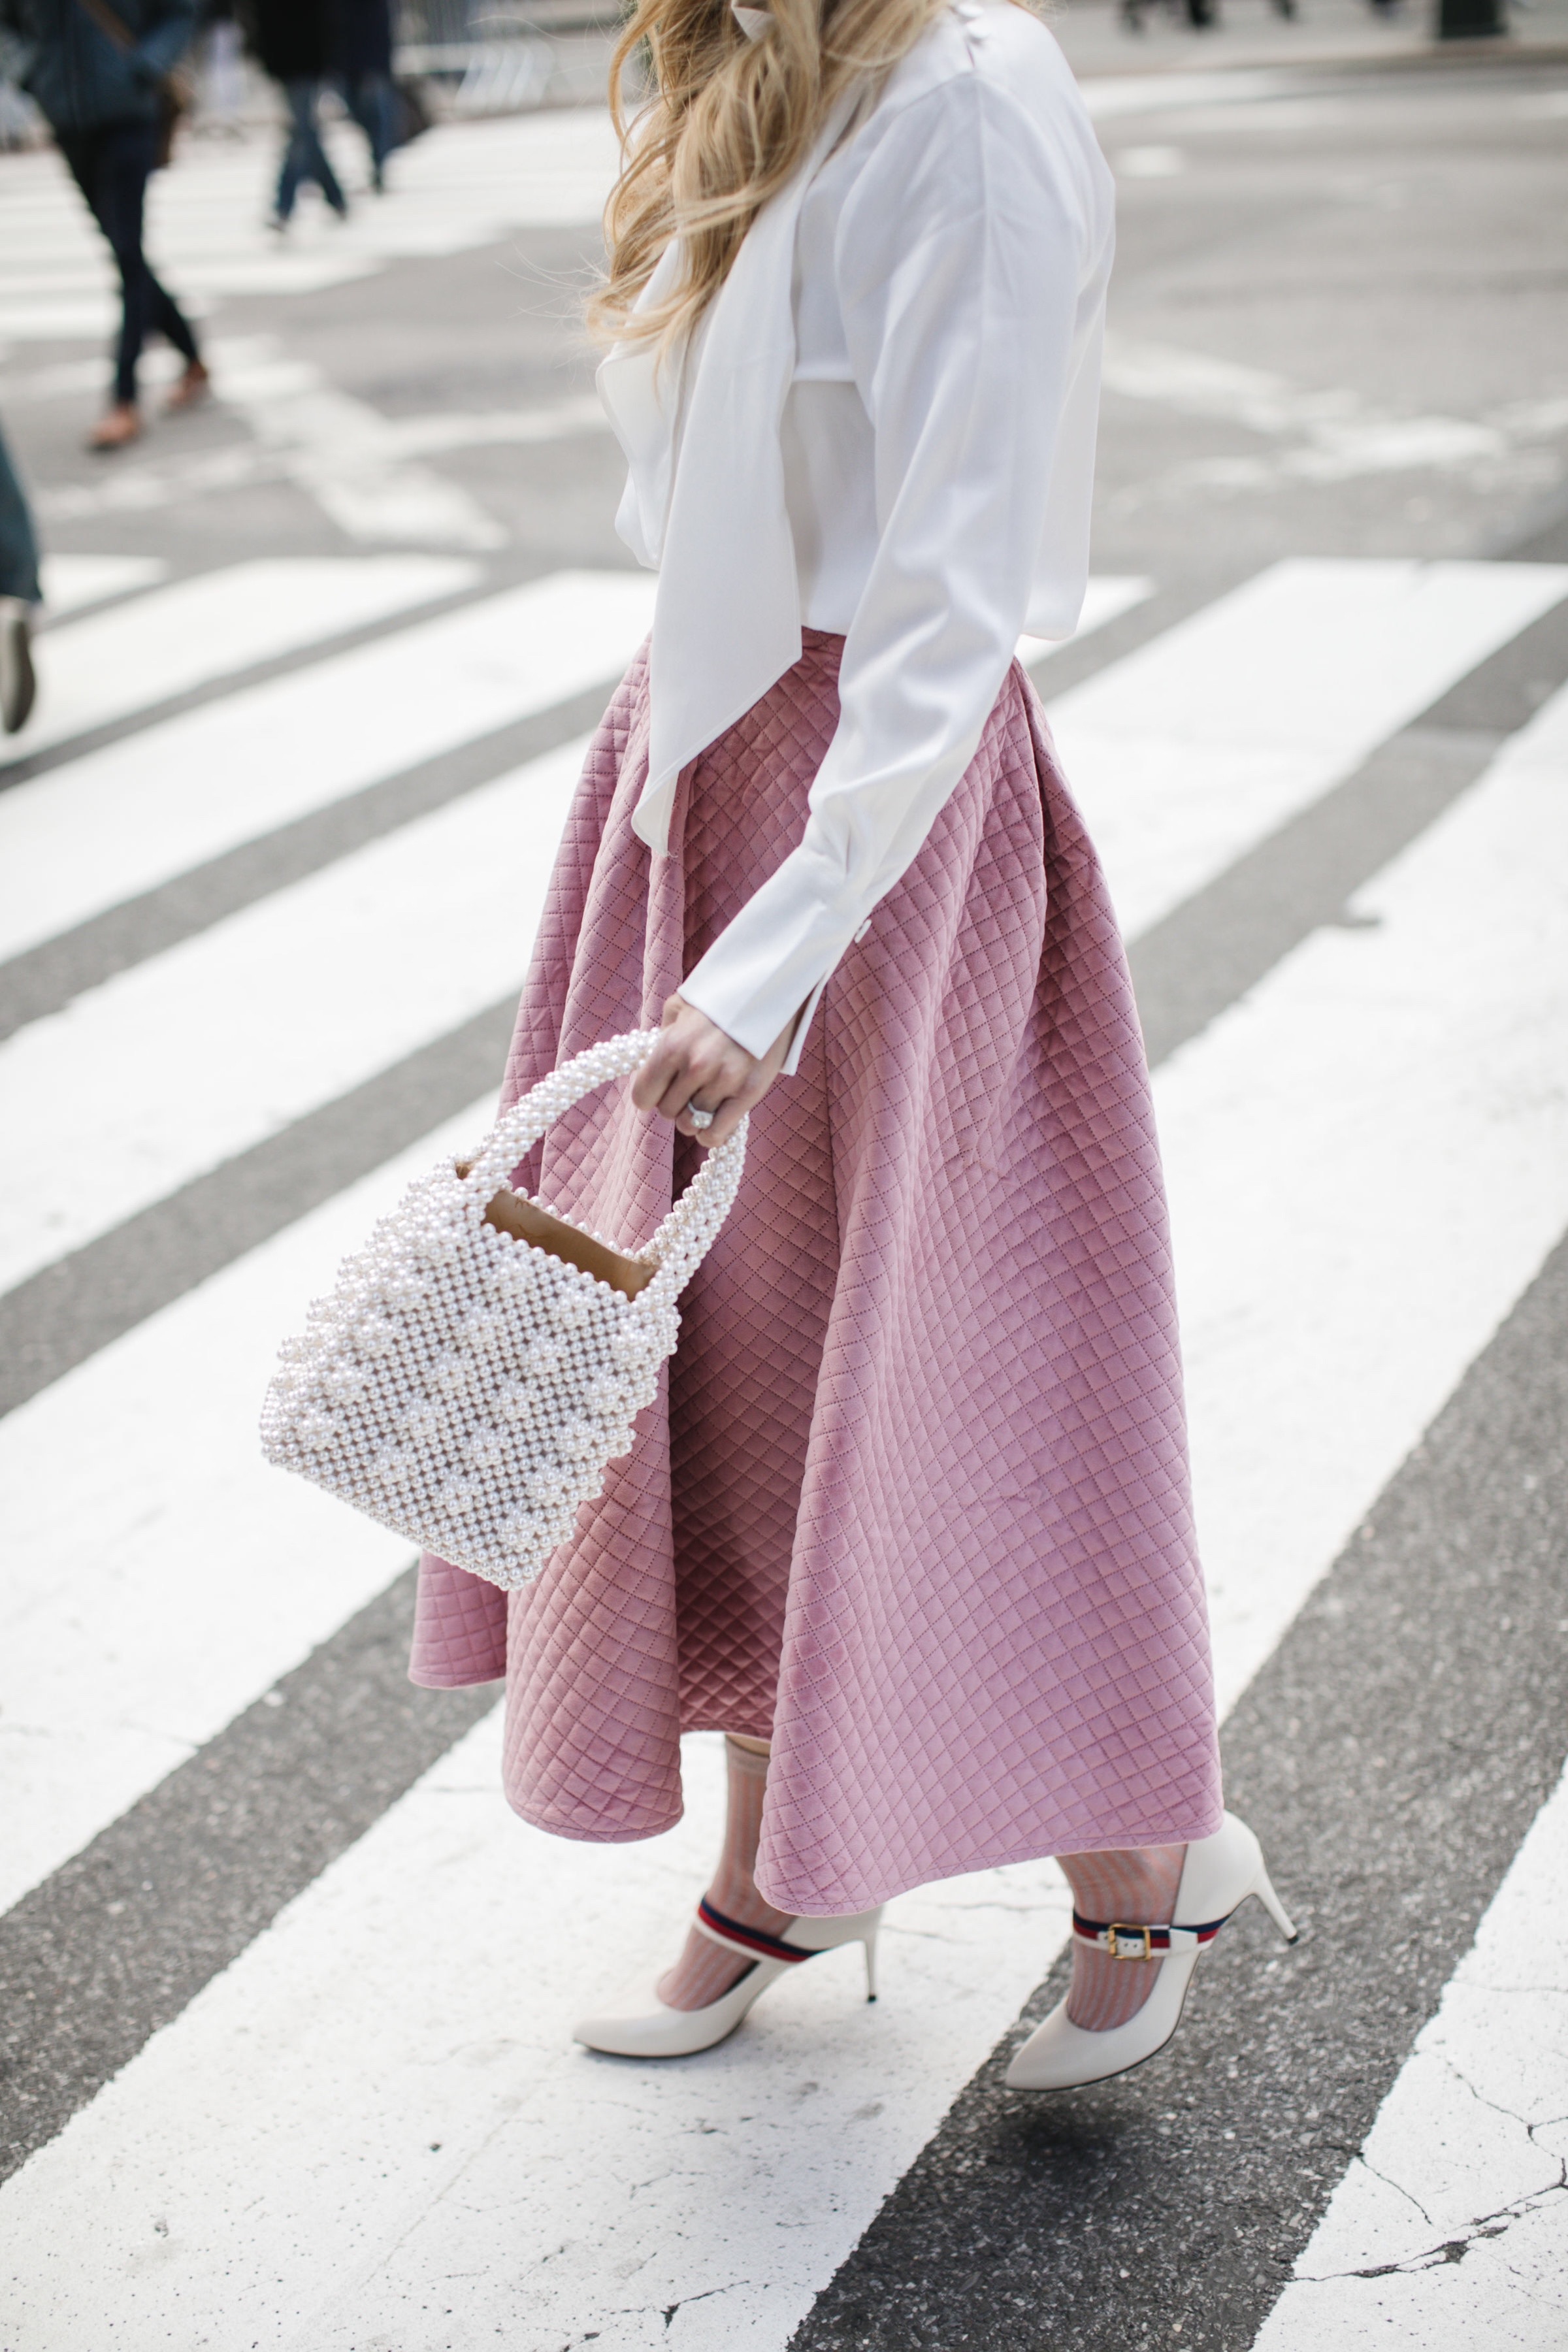 The Prettiest Pink Midi Skirt! | About The Outfits